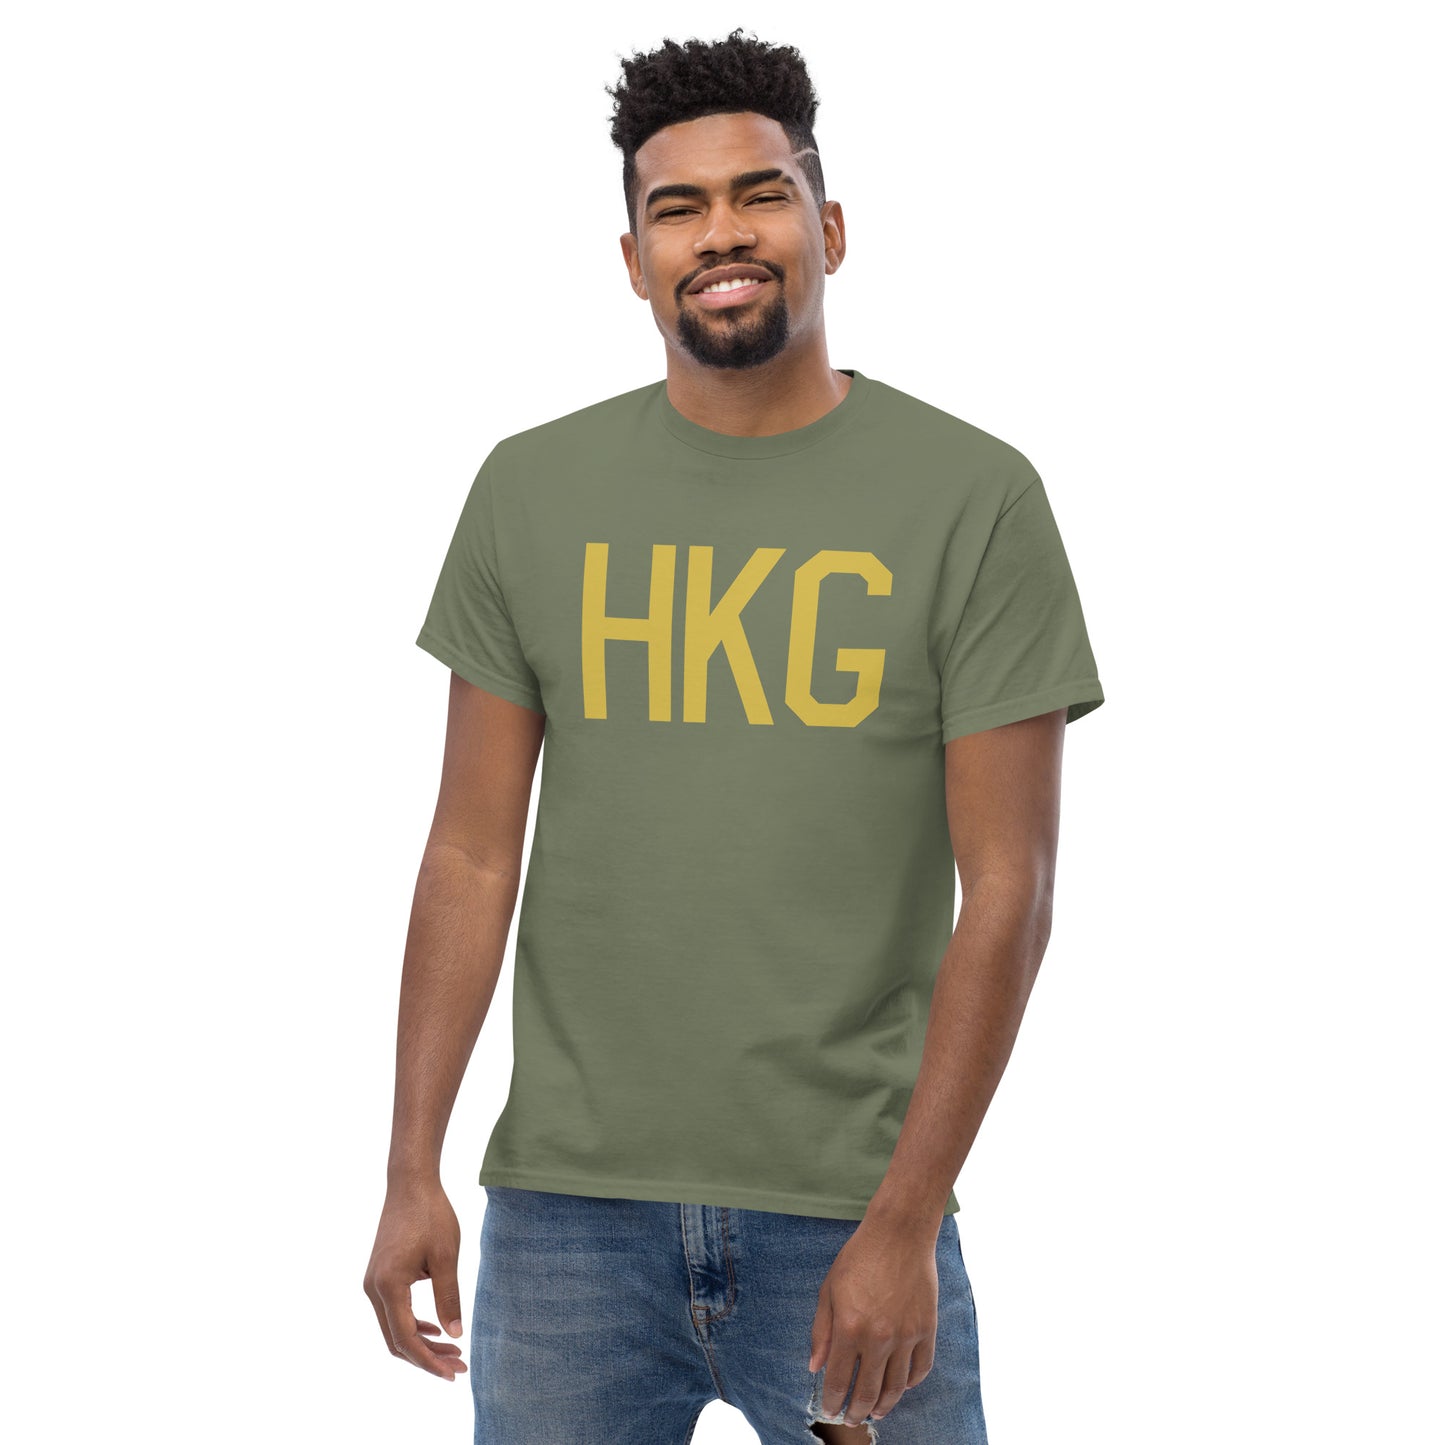 Aviation Enthusiast Men's Tee - Old Gold Graphic • HKG Hong Kong • YHM Designs - Image 06